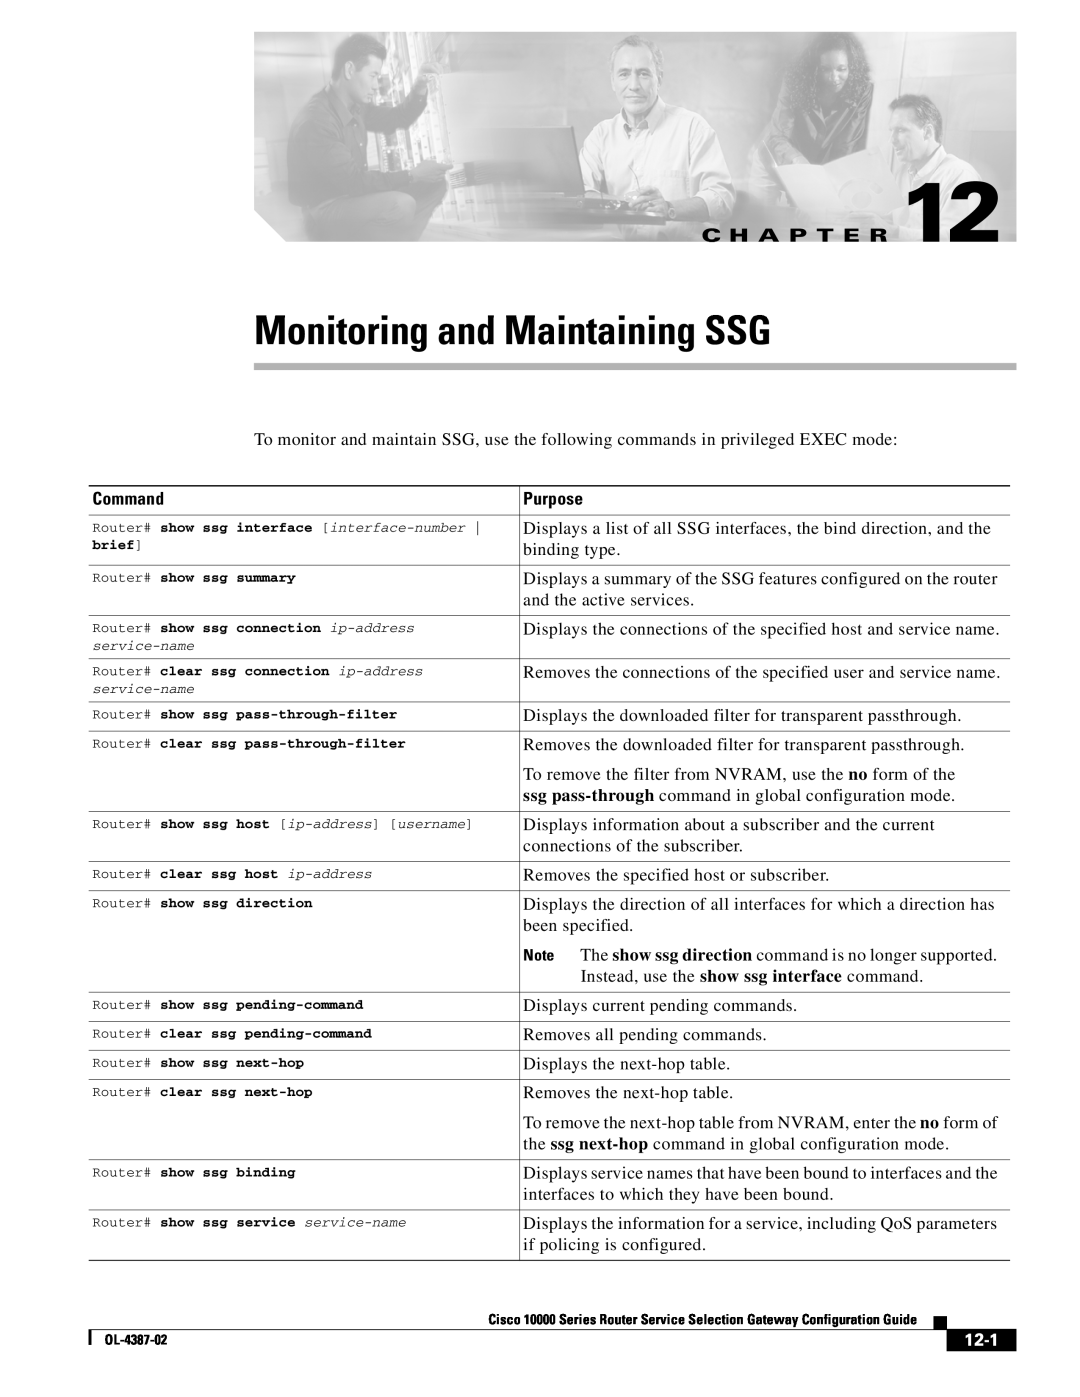 Cisco Systems OL-4387-02 manual Monitoring and Maintaining SSG, 12-1, C H A P T E R, Command, Purpose 